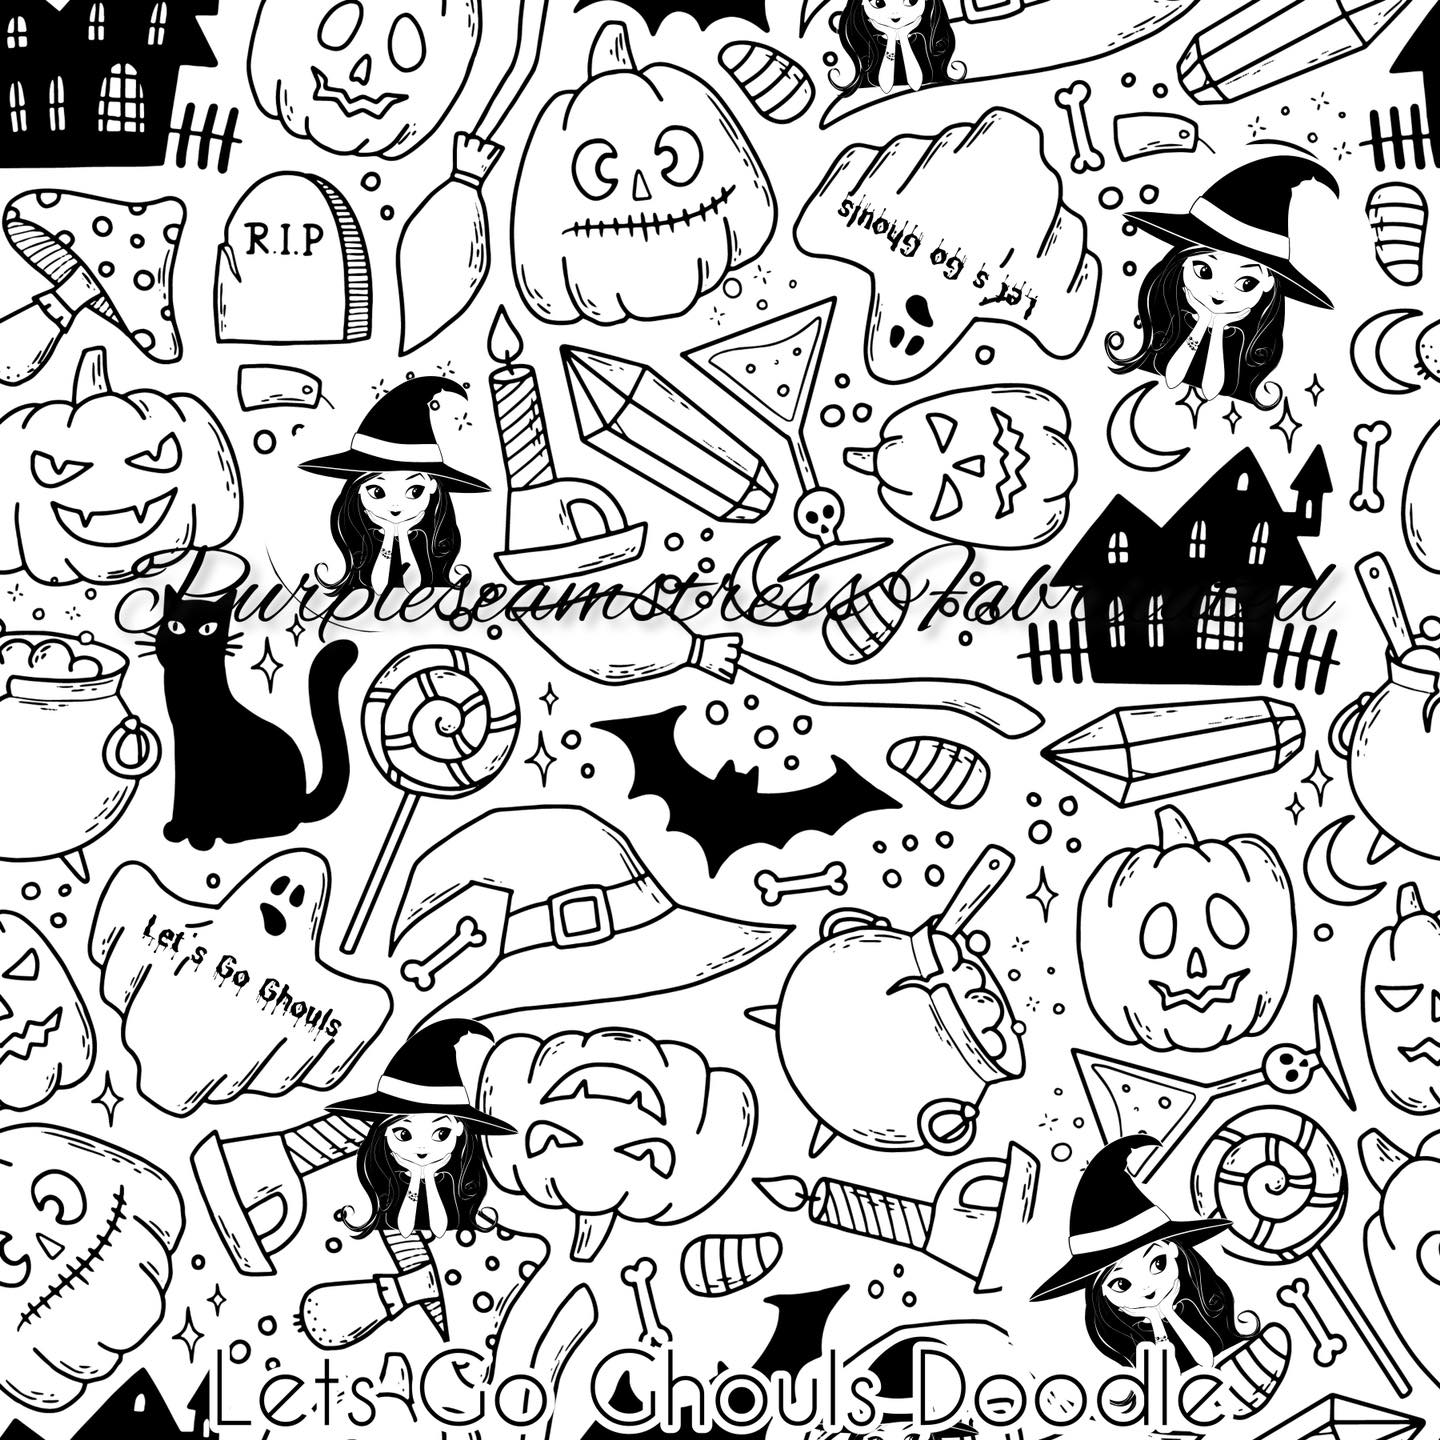 Let’s Go Ghouls Doodle Cotton Lycra – Purpleseamstress Fabric